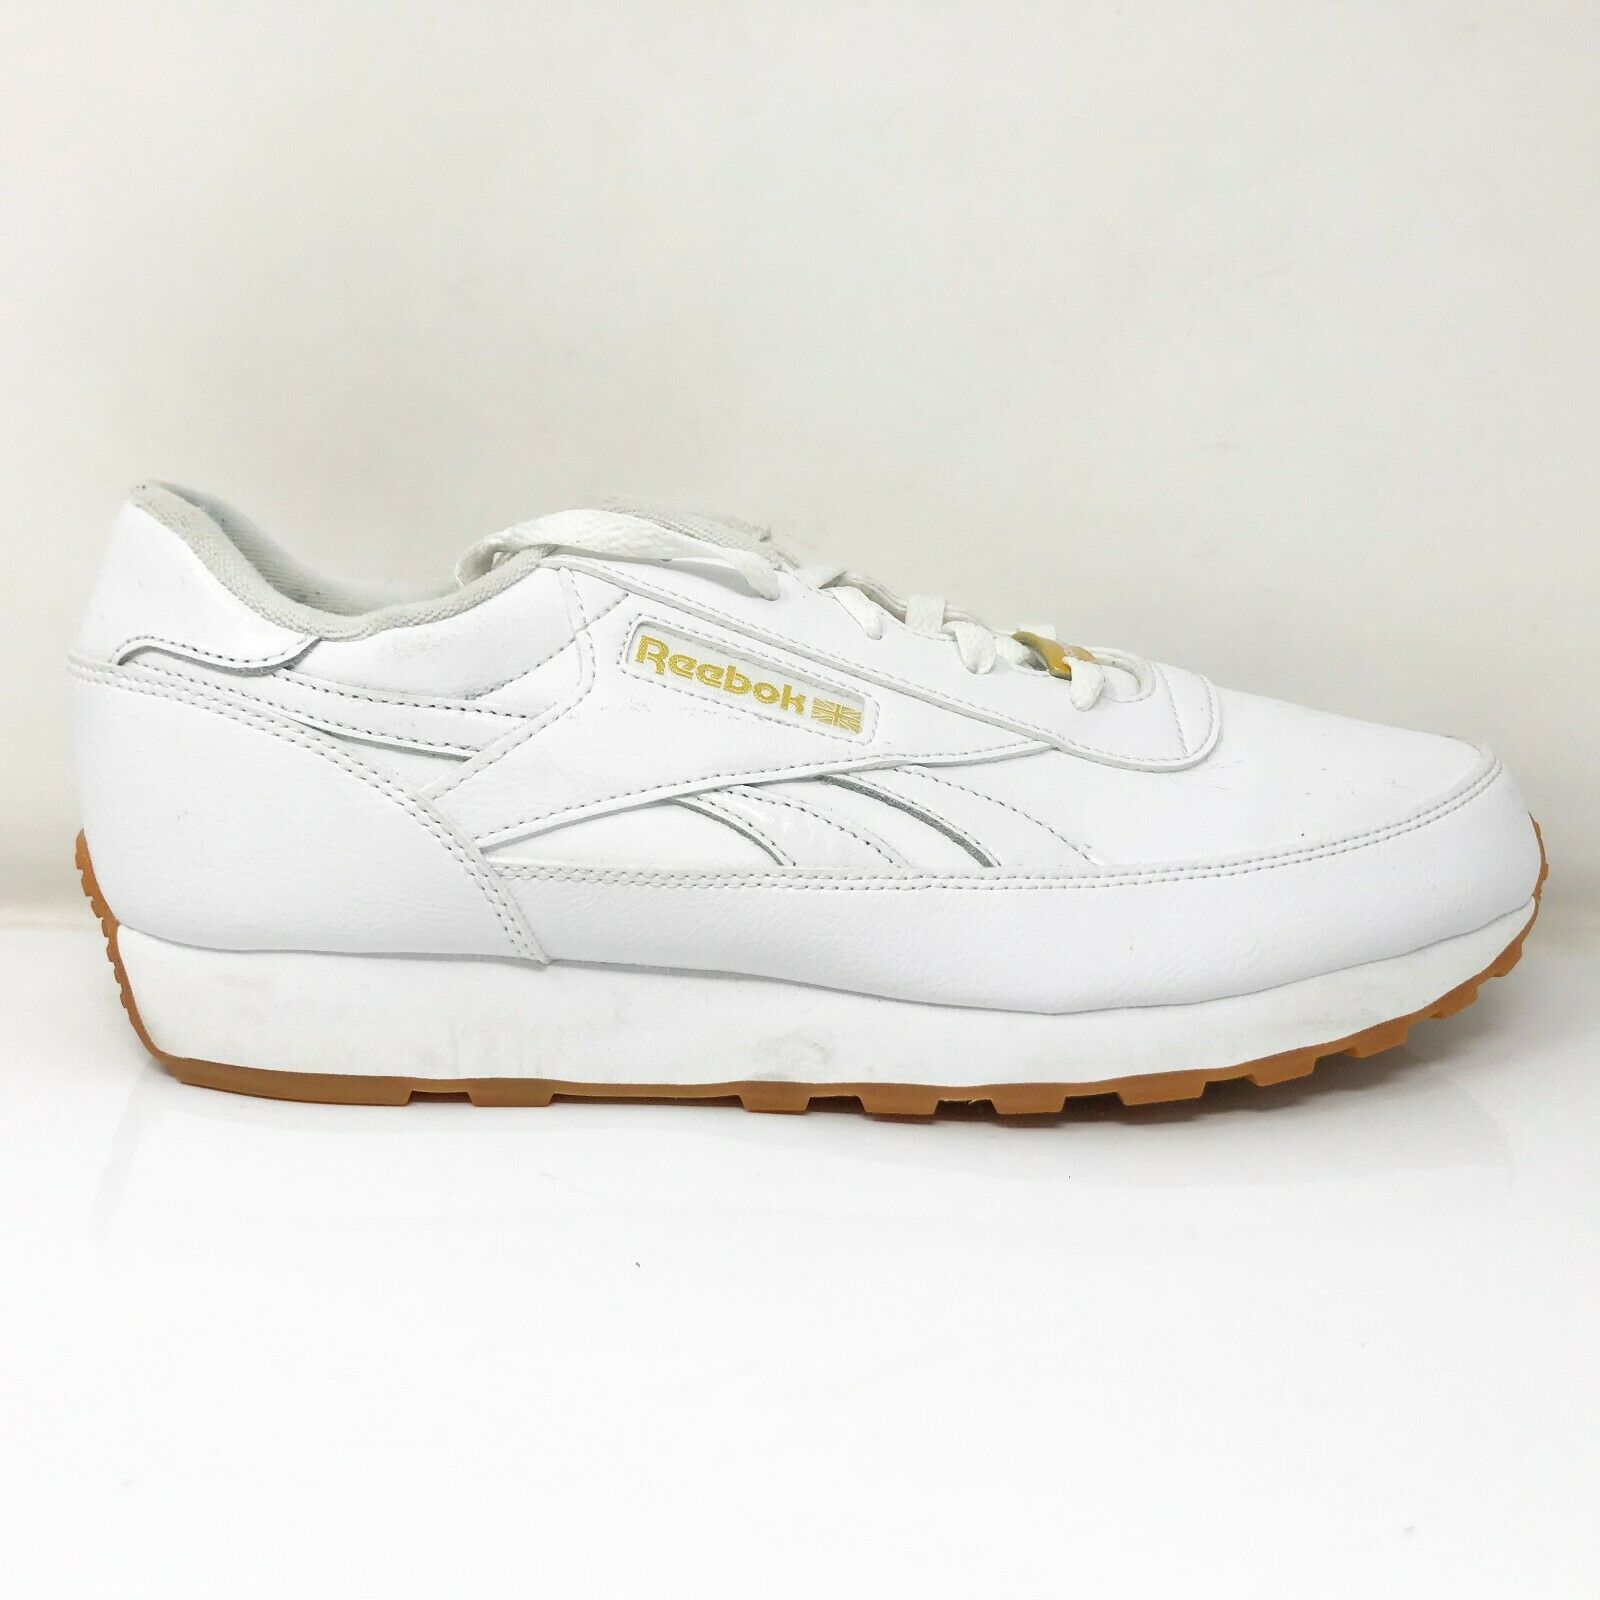 Reebok Mens Classic 1Y3502 White Running Shoes Lace Up Low Top Size 10 X Wide 4E